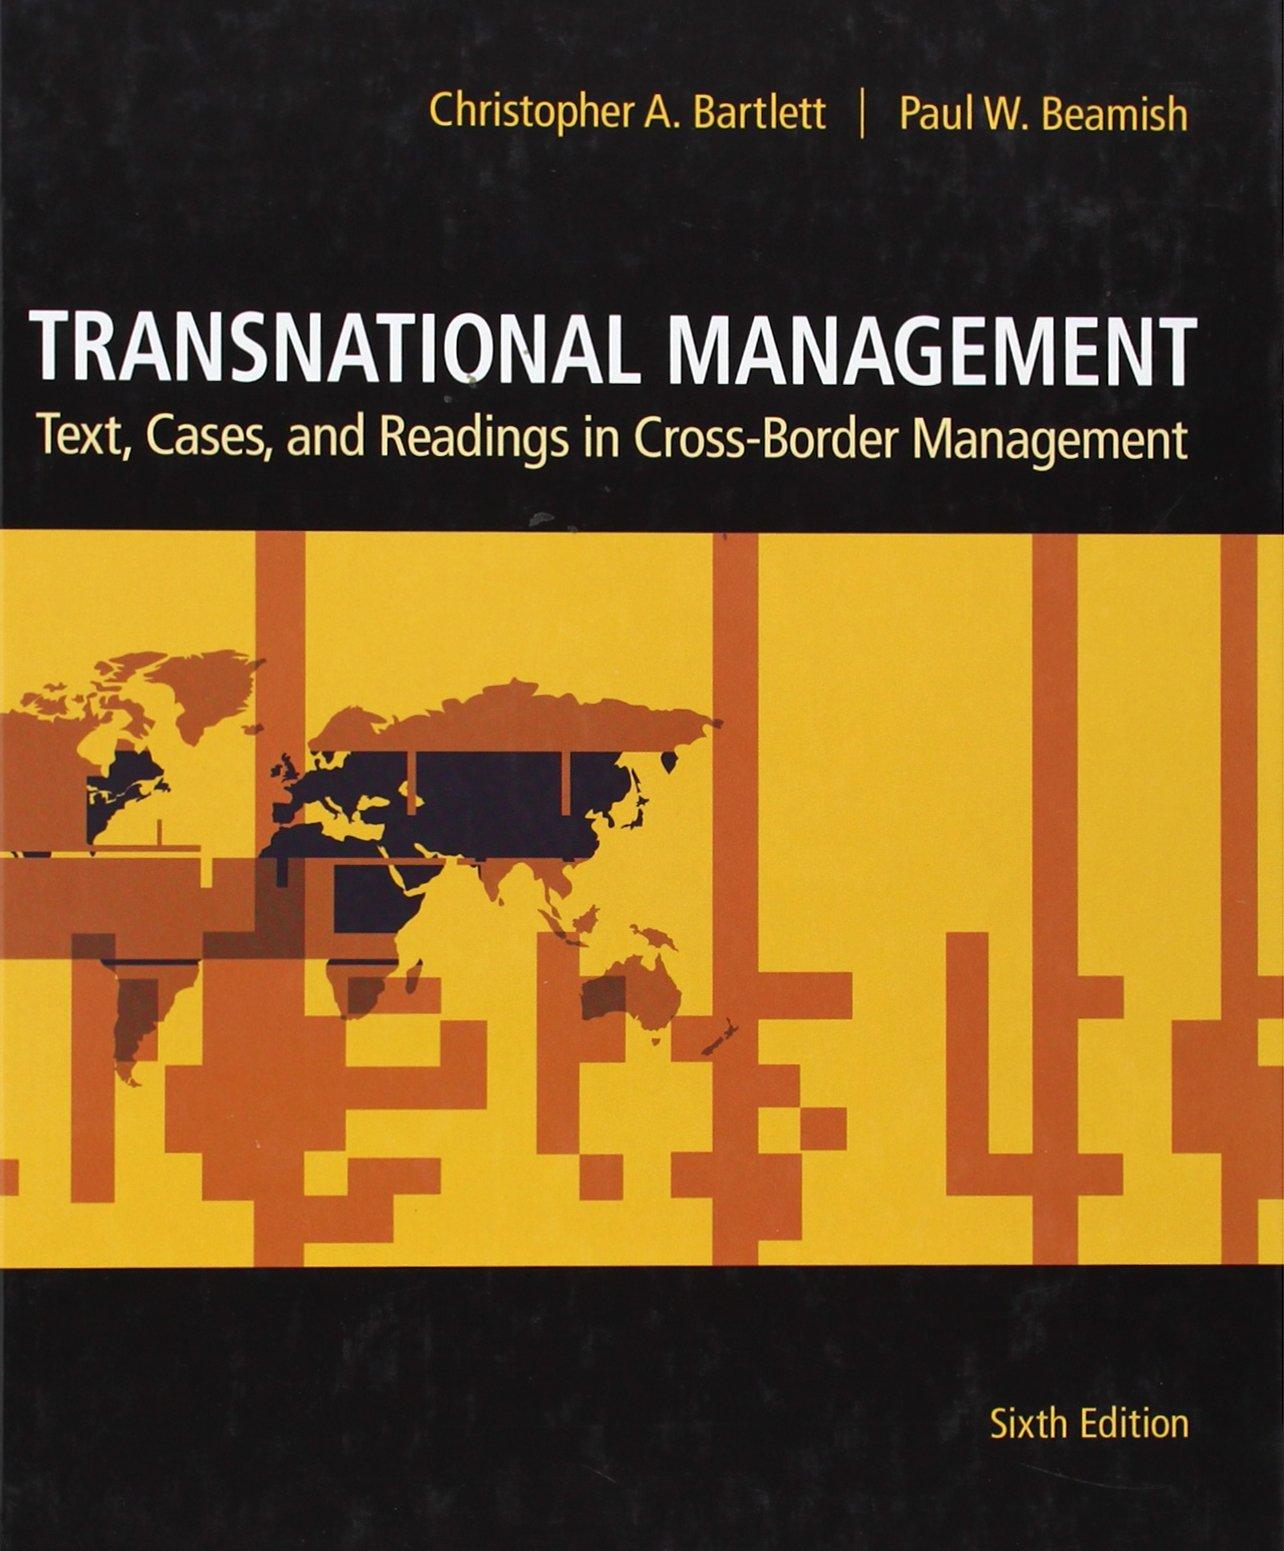 transnational management text cases and readings in cross border management 6th edition christopher bartlett,